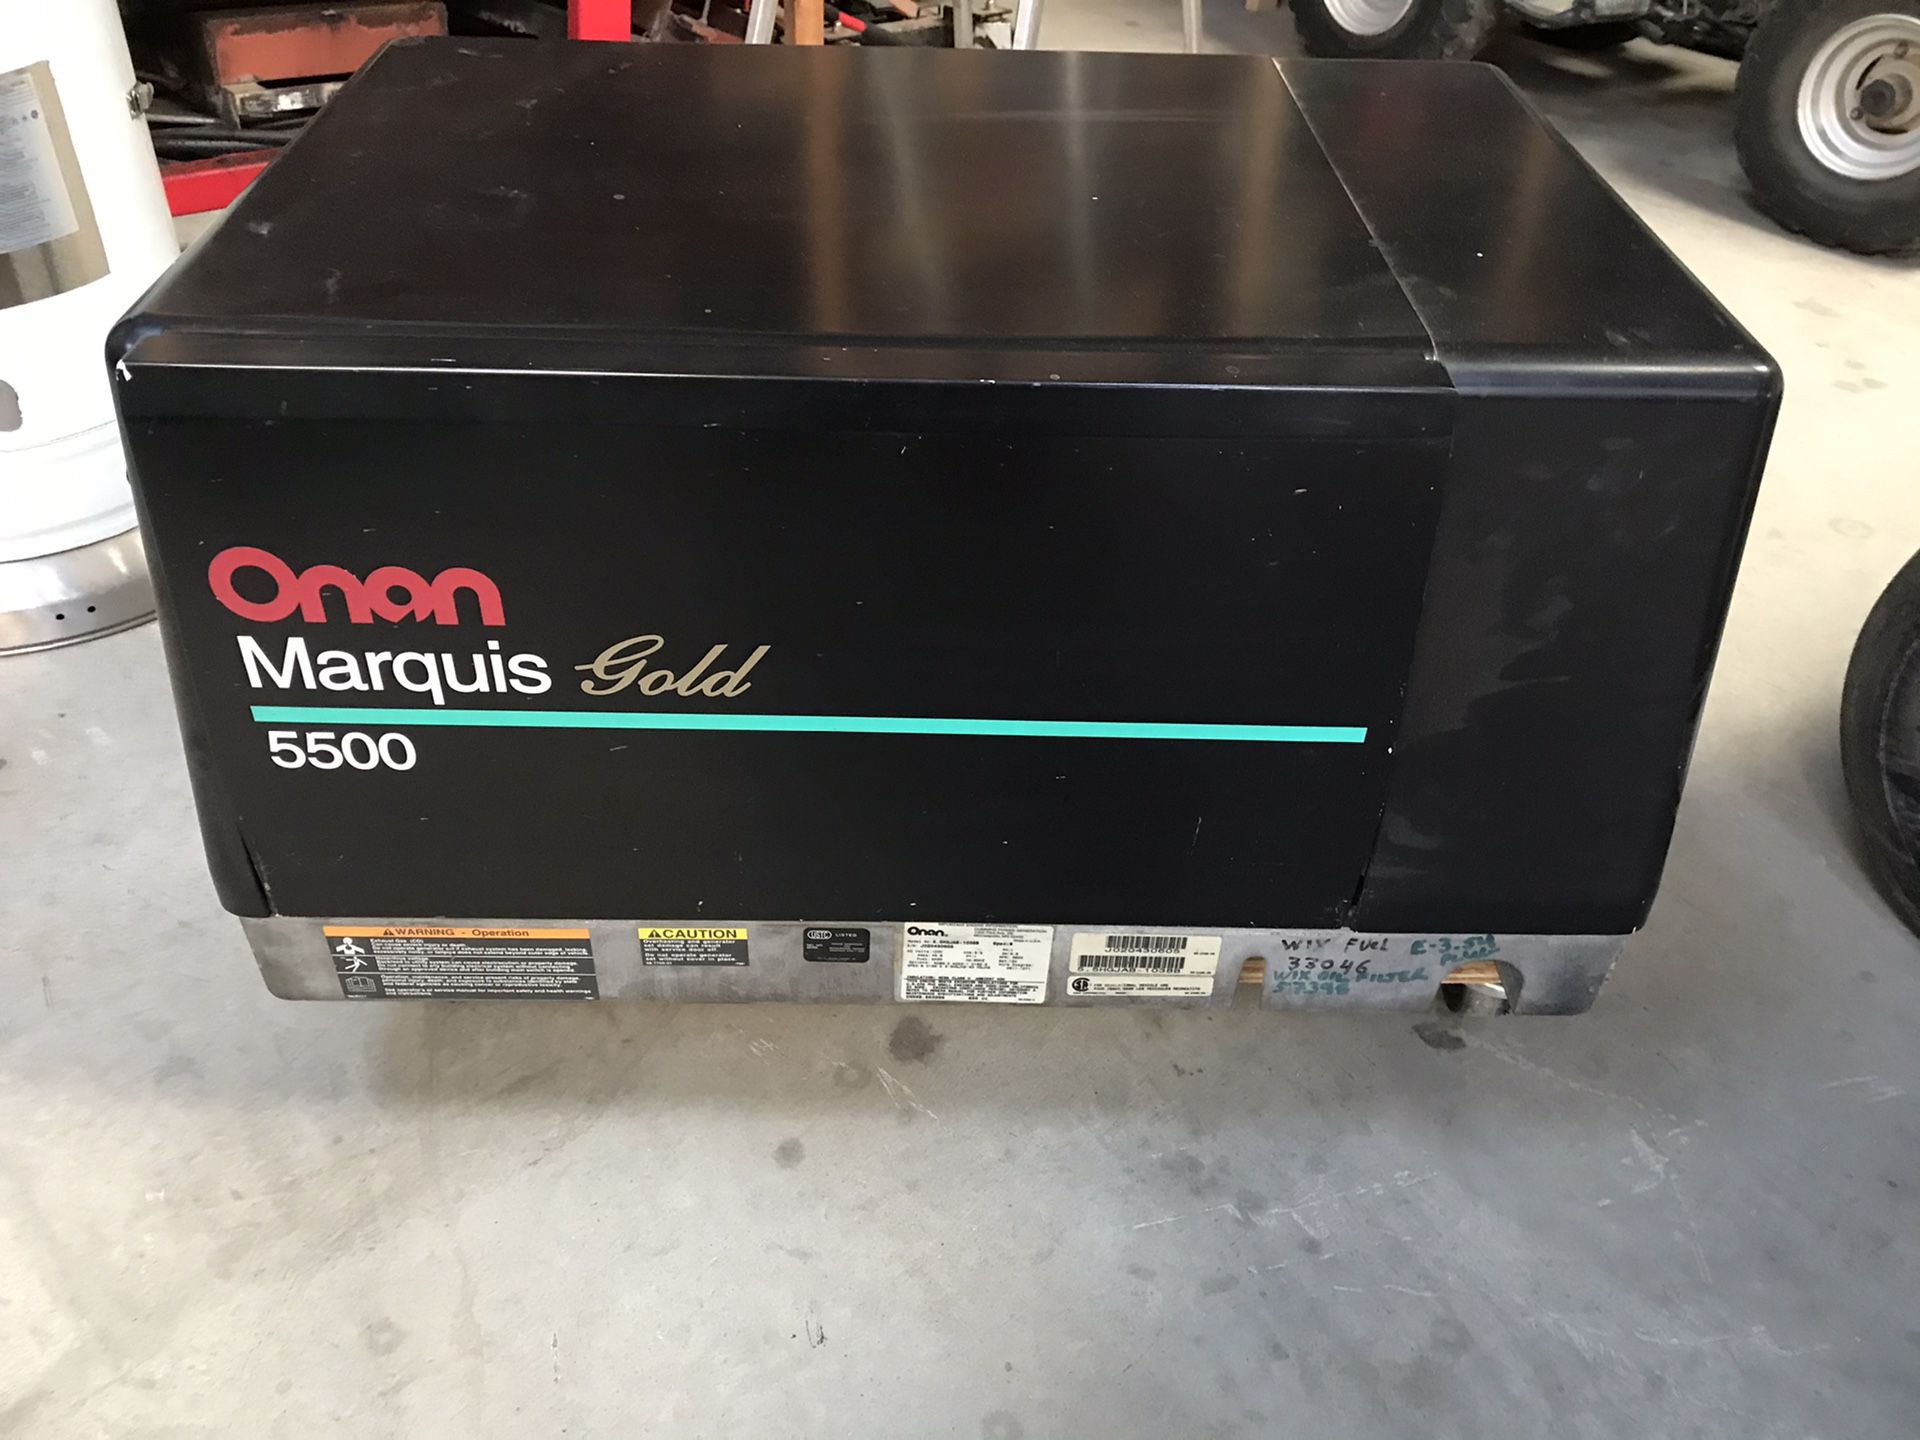 Oman 5500 generator ran great when it was removed from toy hauler,comes with remote switch too